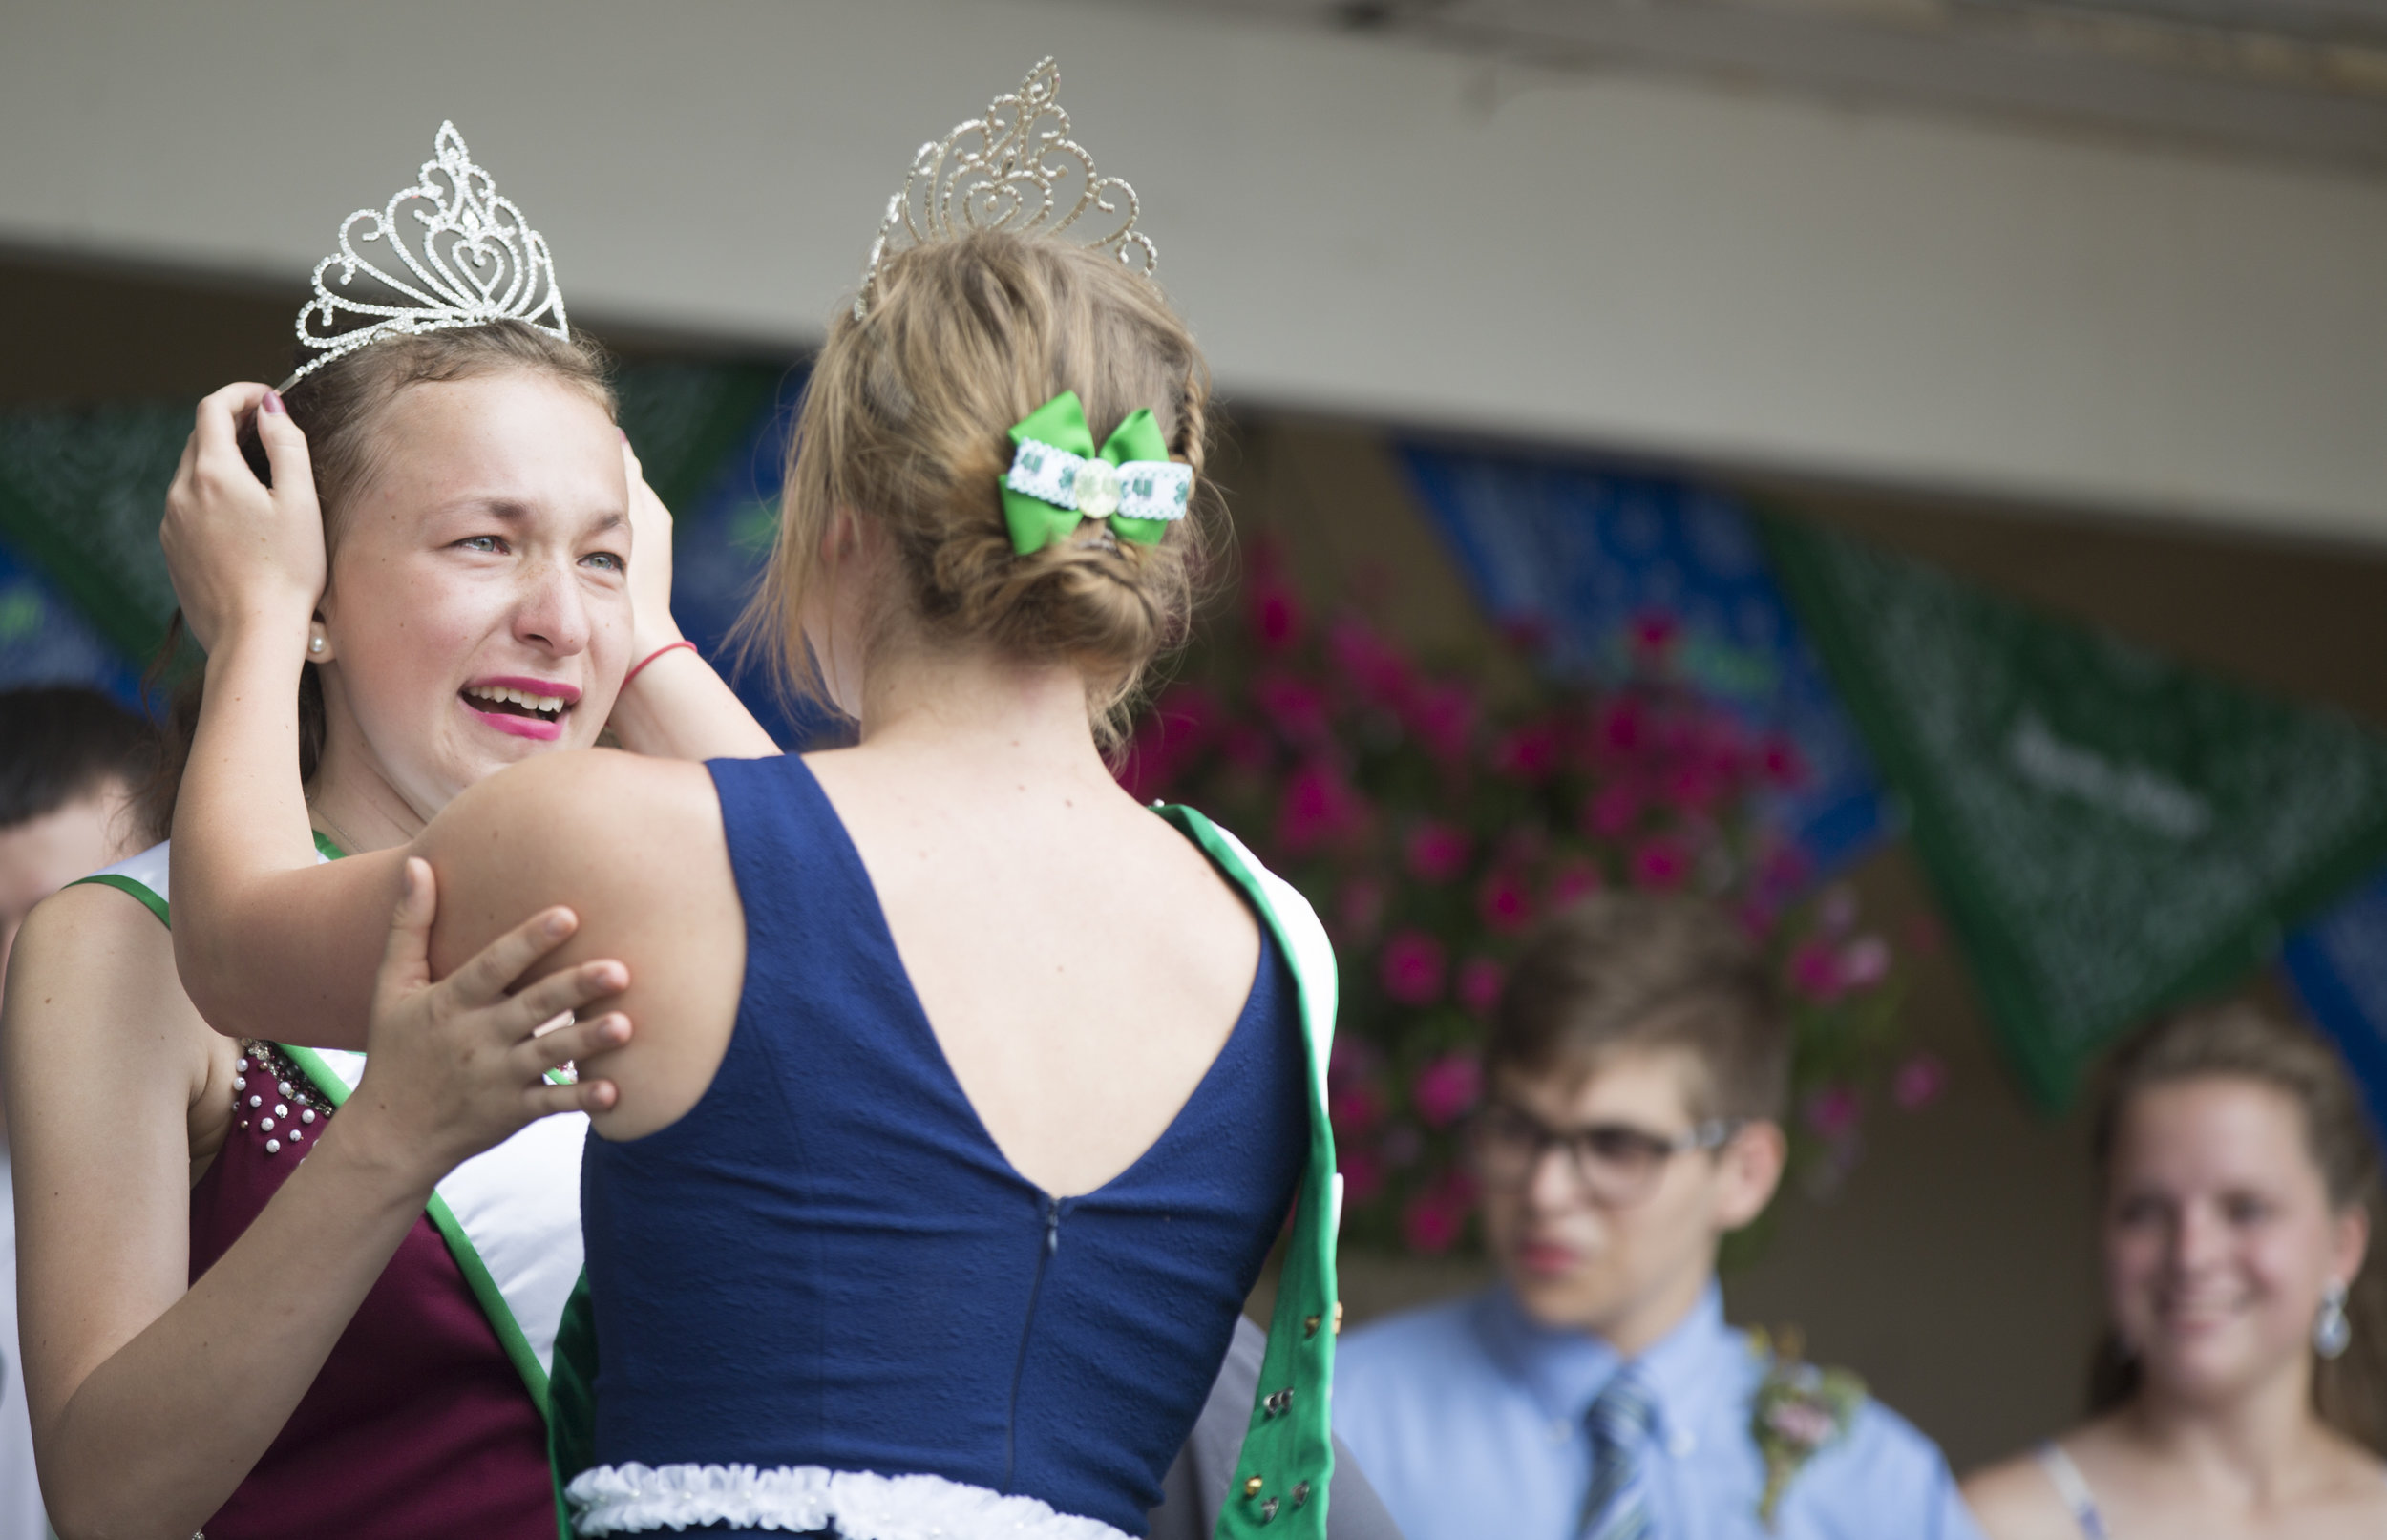  Callia Barwick, left, 16, of Canfield, Ohio, gets crowned the 2018 4-H queen by Tiffany Voland, of North Jackson, Ohio, the 2017 4-H queen, during the 4-H King and Queen coronation at the Canfield Fair's Youth Day Ceremony on Thursday, Aug. 30, 2018